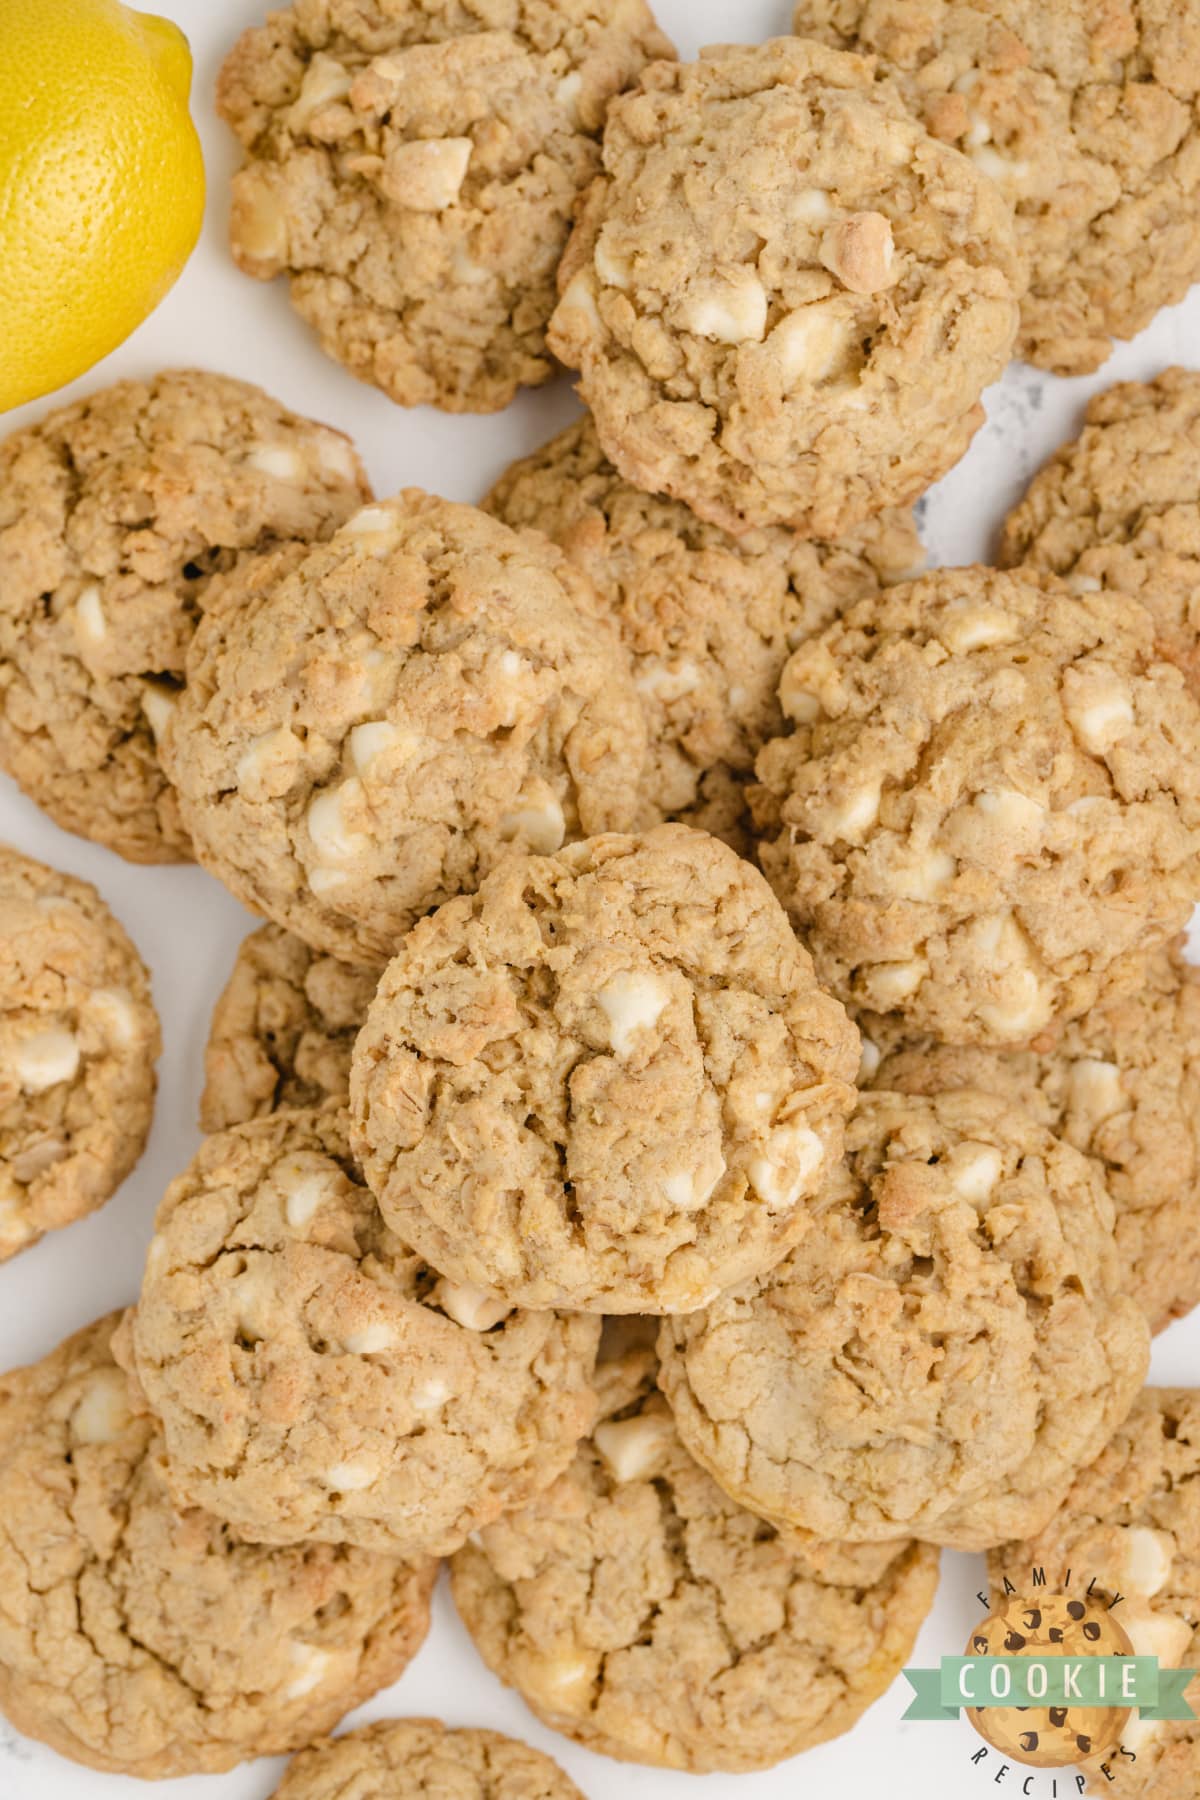 Lemon Oatmeal Cookies are soft, chewy, and made with lemon pudding mix and white chocolate chips! Easy oatmeal cookie recipe with a ton of lemon flavor!